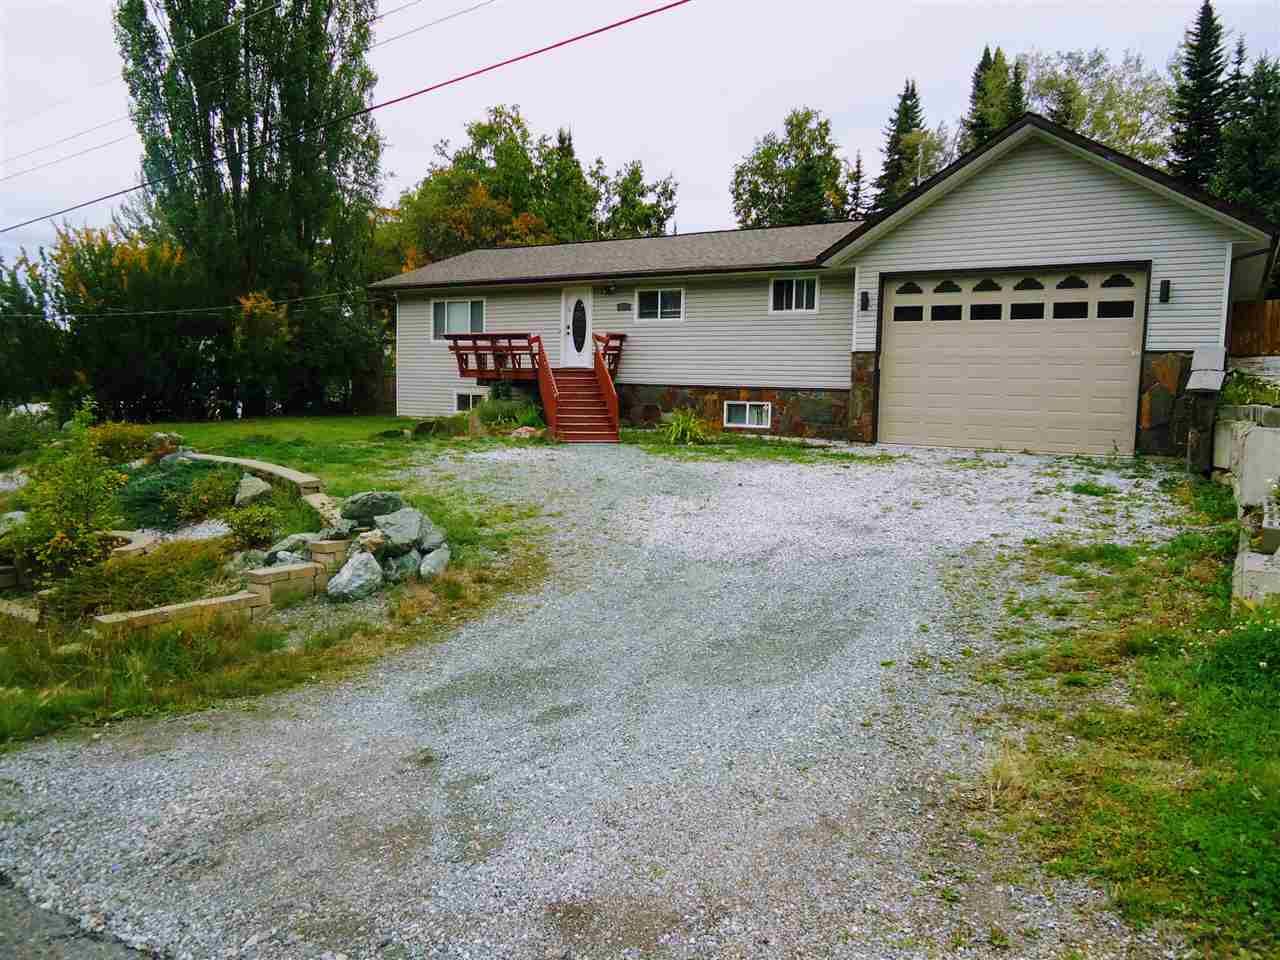 Main Photo: 7200 BEAR Road in Prince George: Lafreniere House for sale (PG City South (Zone 74))  : MLS®# R2403913